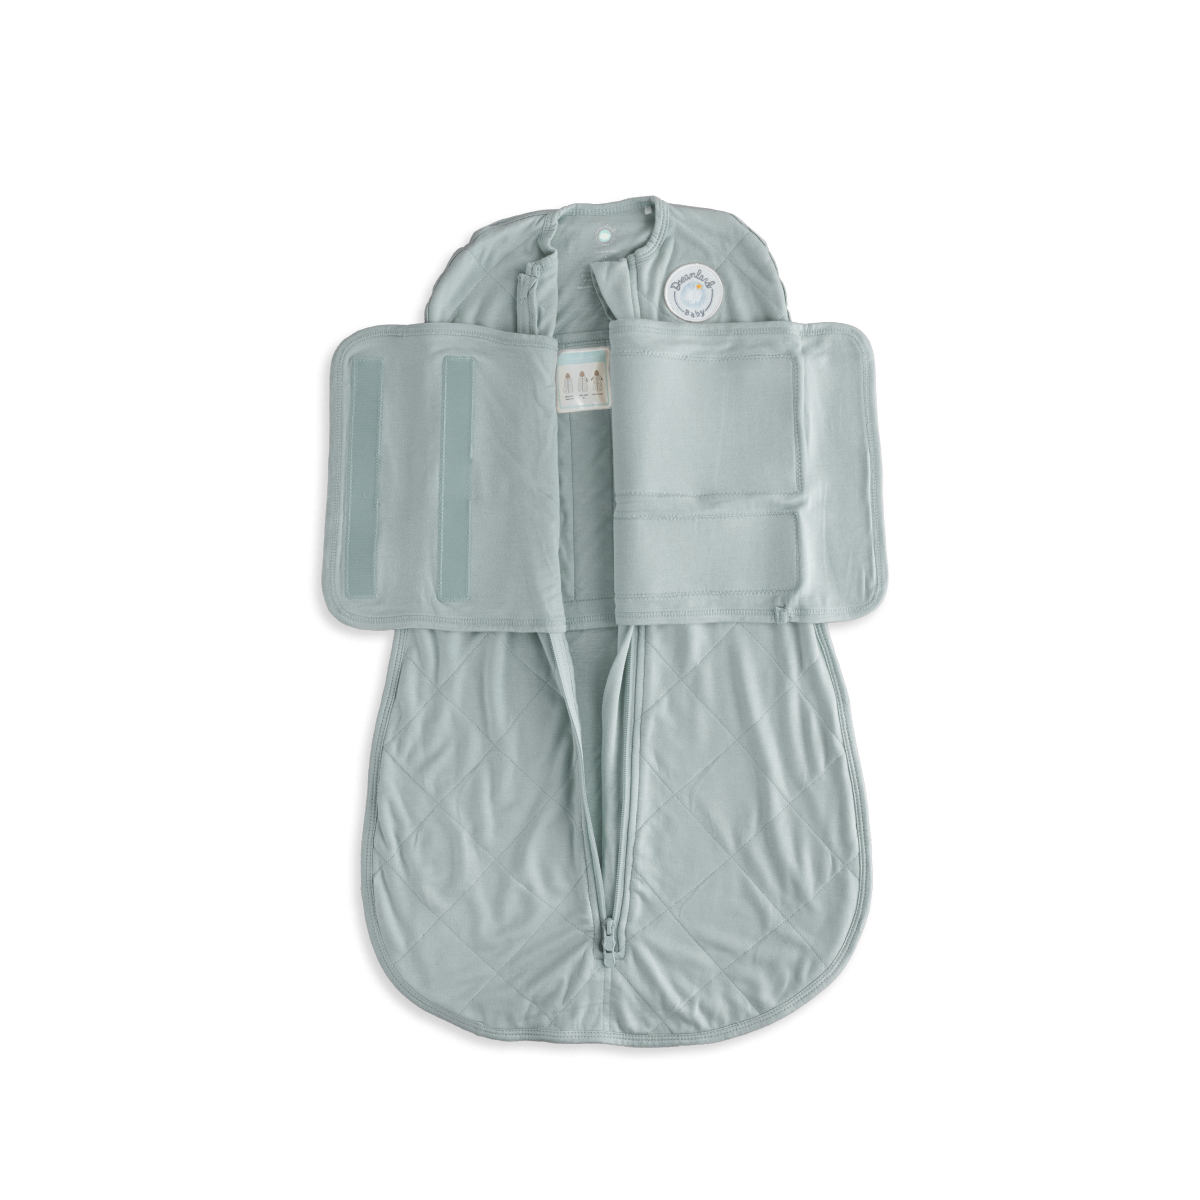 Bamboo Classic Swaddle, 0-6 Months (Non-weighted)